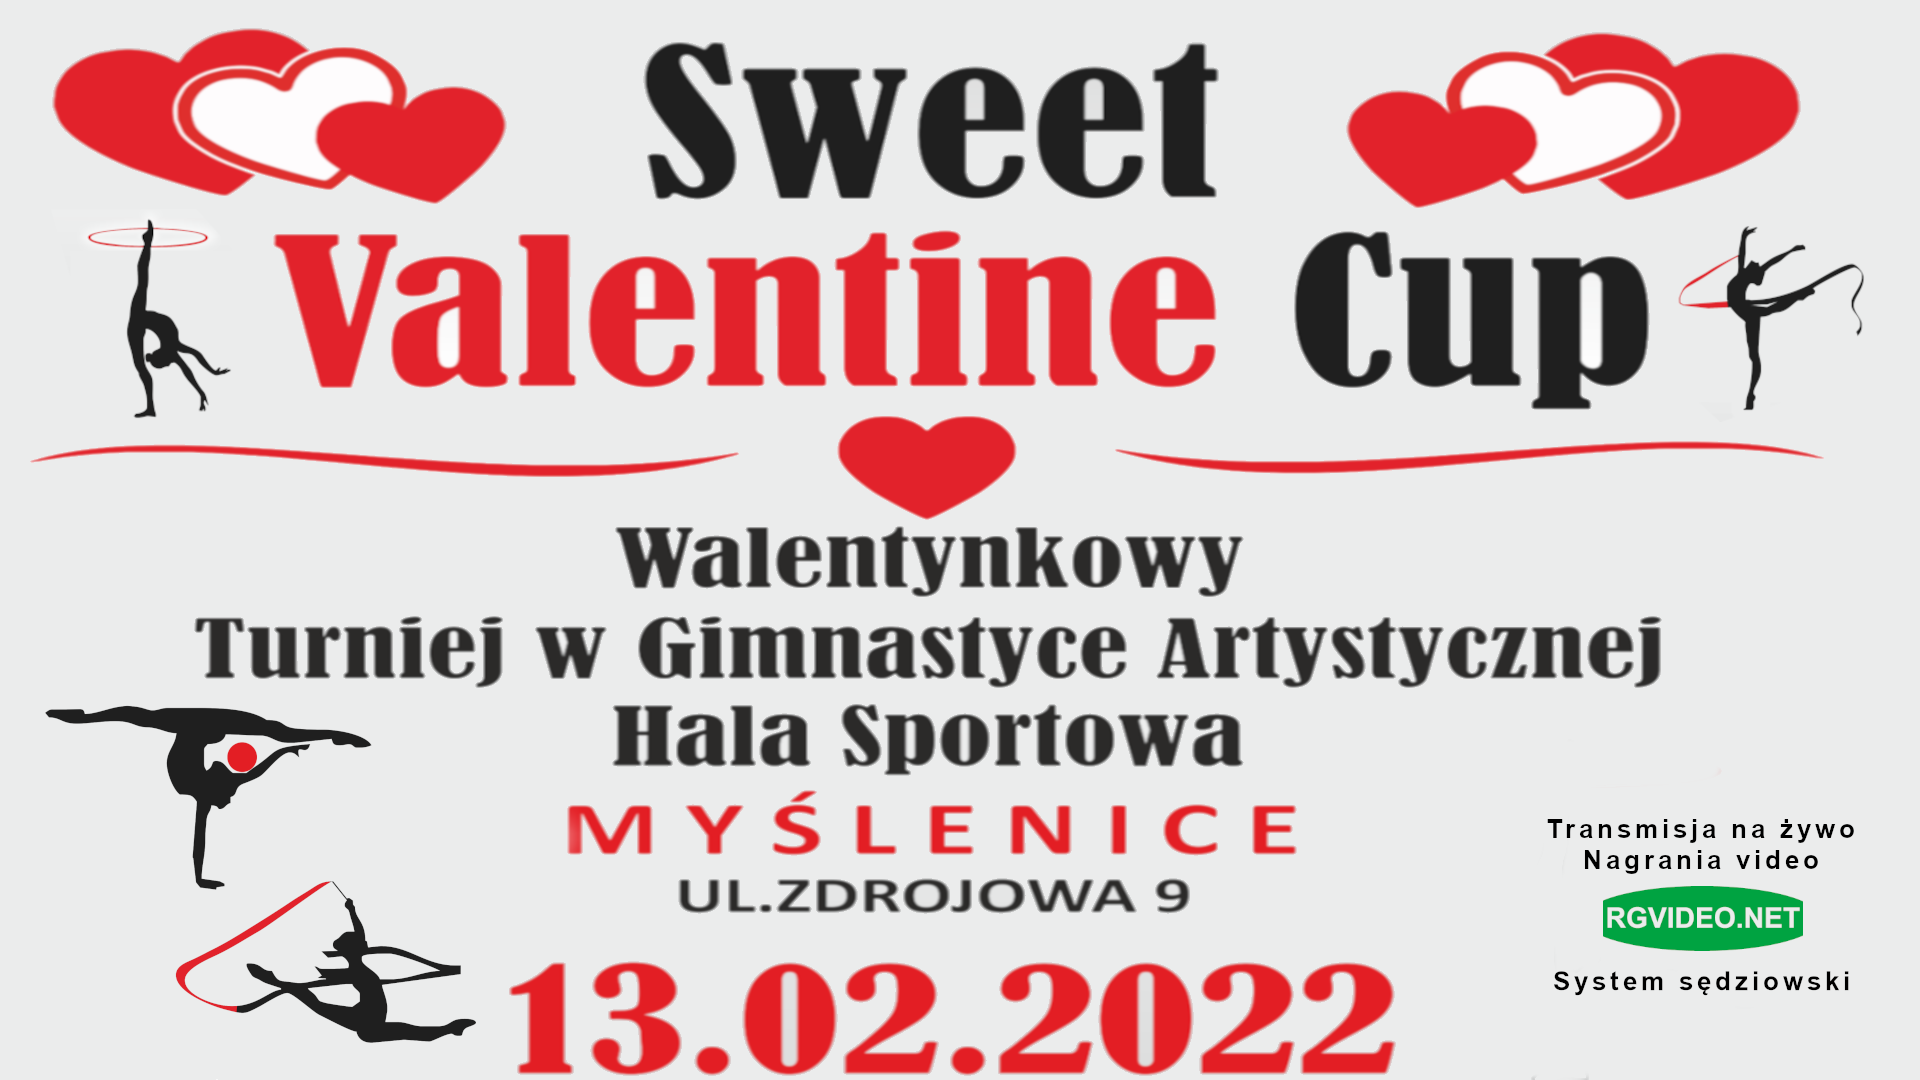 SWEET VALENTINES CUP 2022